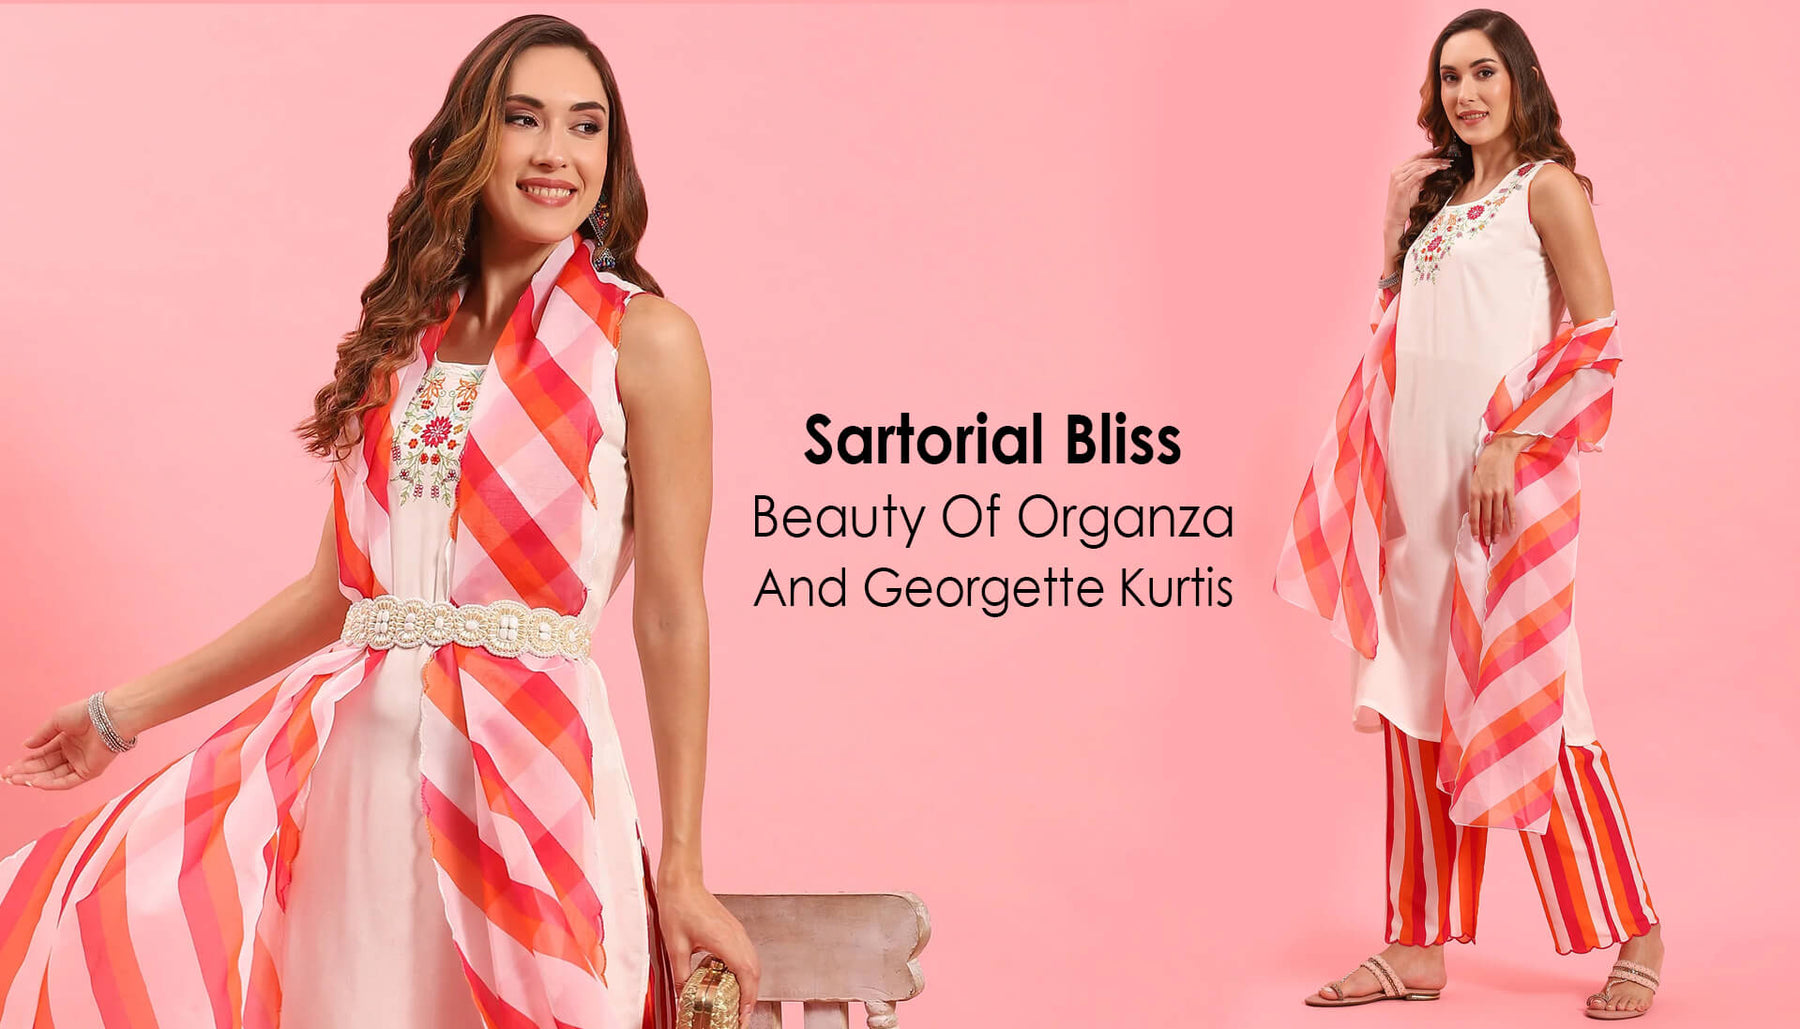 Sartorial Bliss: Beauty Of Organza And Georgette Kurtis